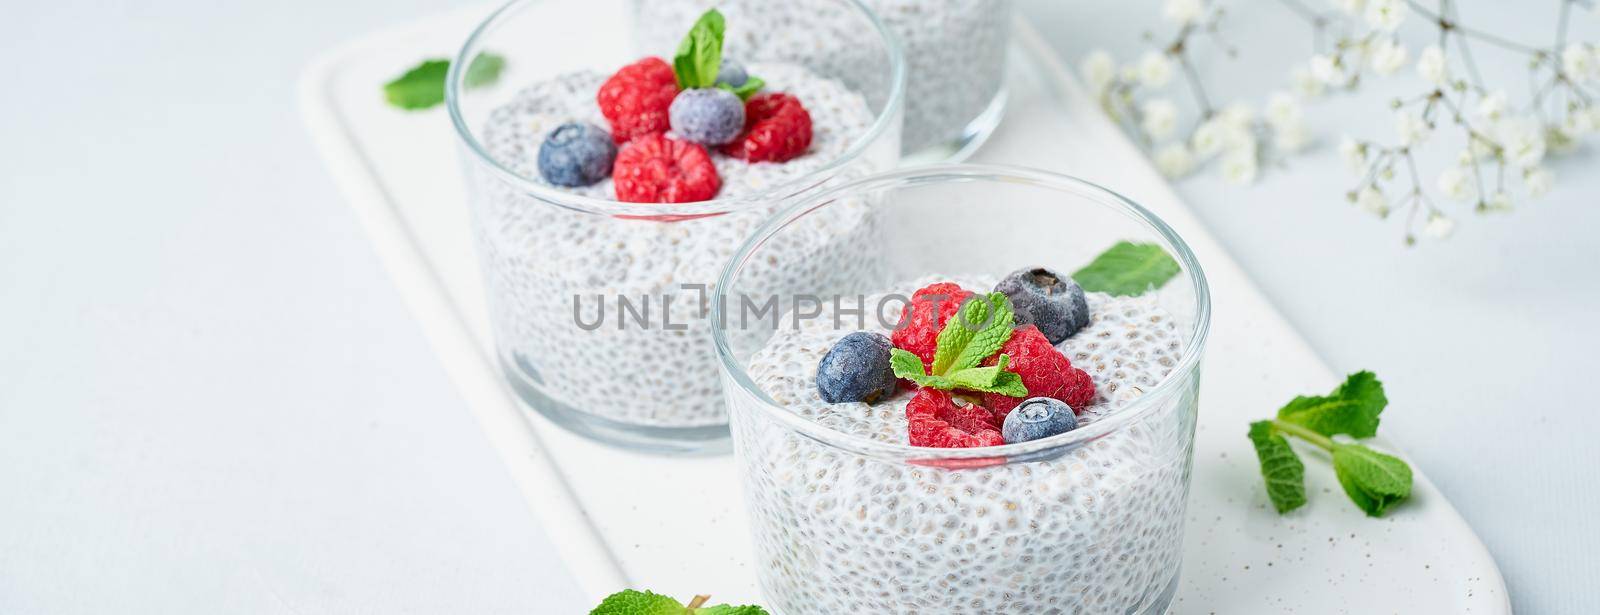 Banner with chia pudding with fresh berries raspberries, blueberries. Three glass, light background, side view, flowers